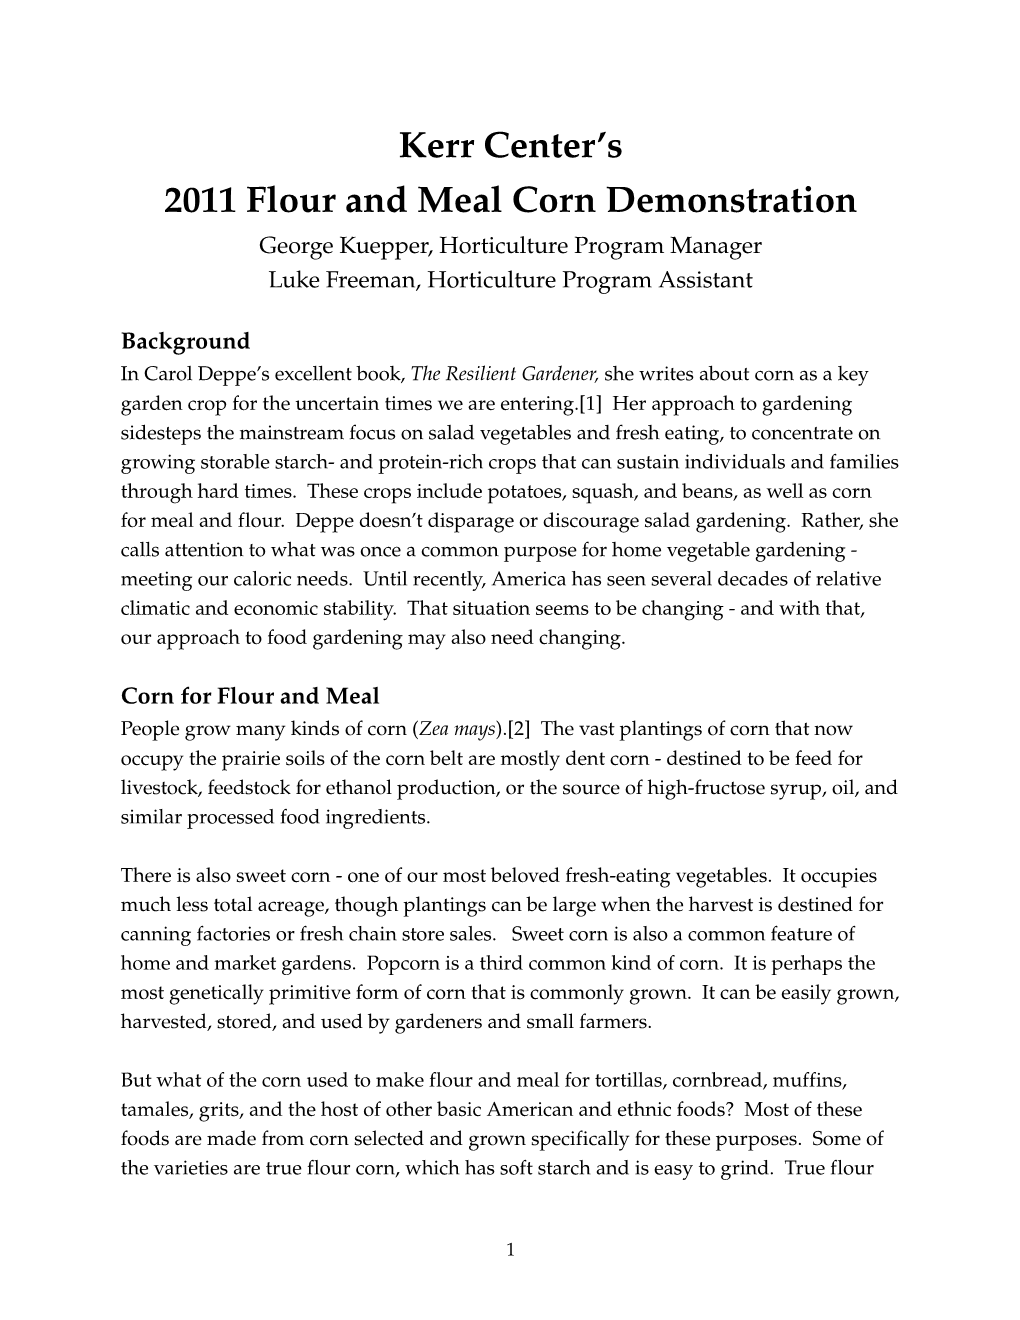 Kerr Center's 2011 Flour and Meal Corn Demonstration